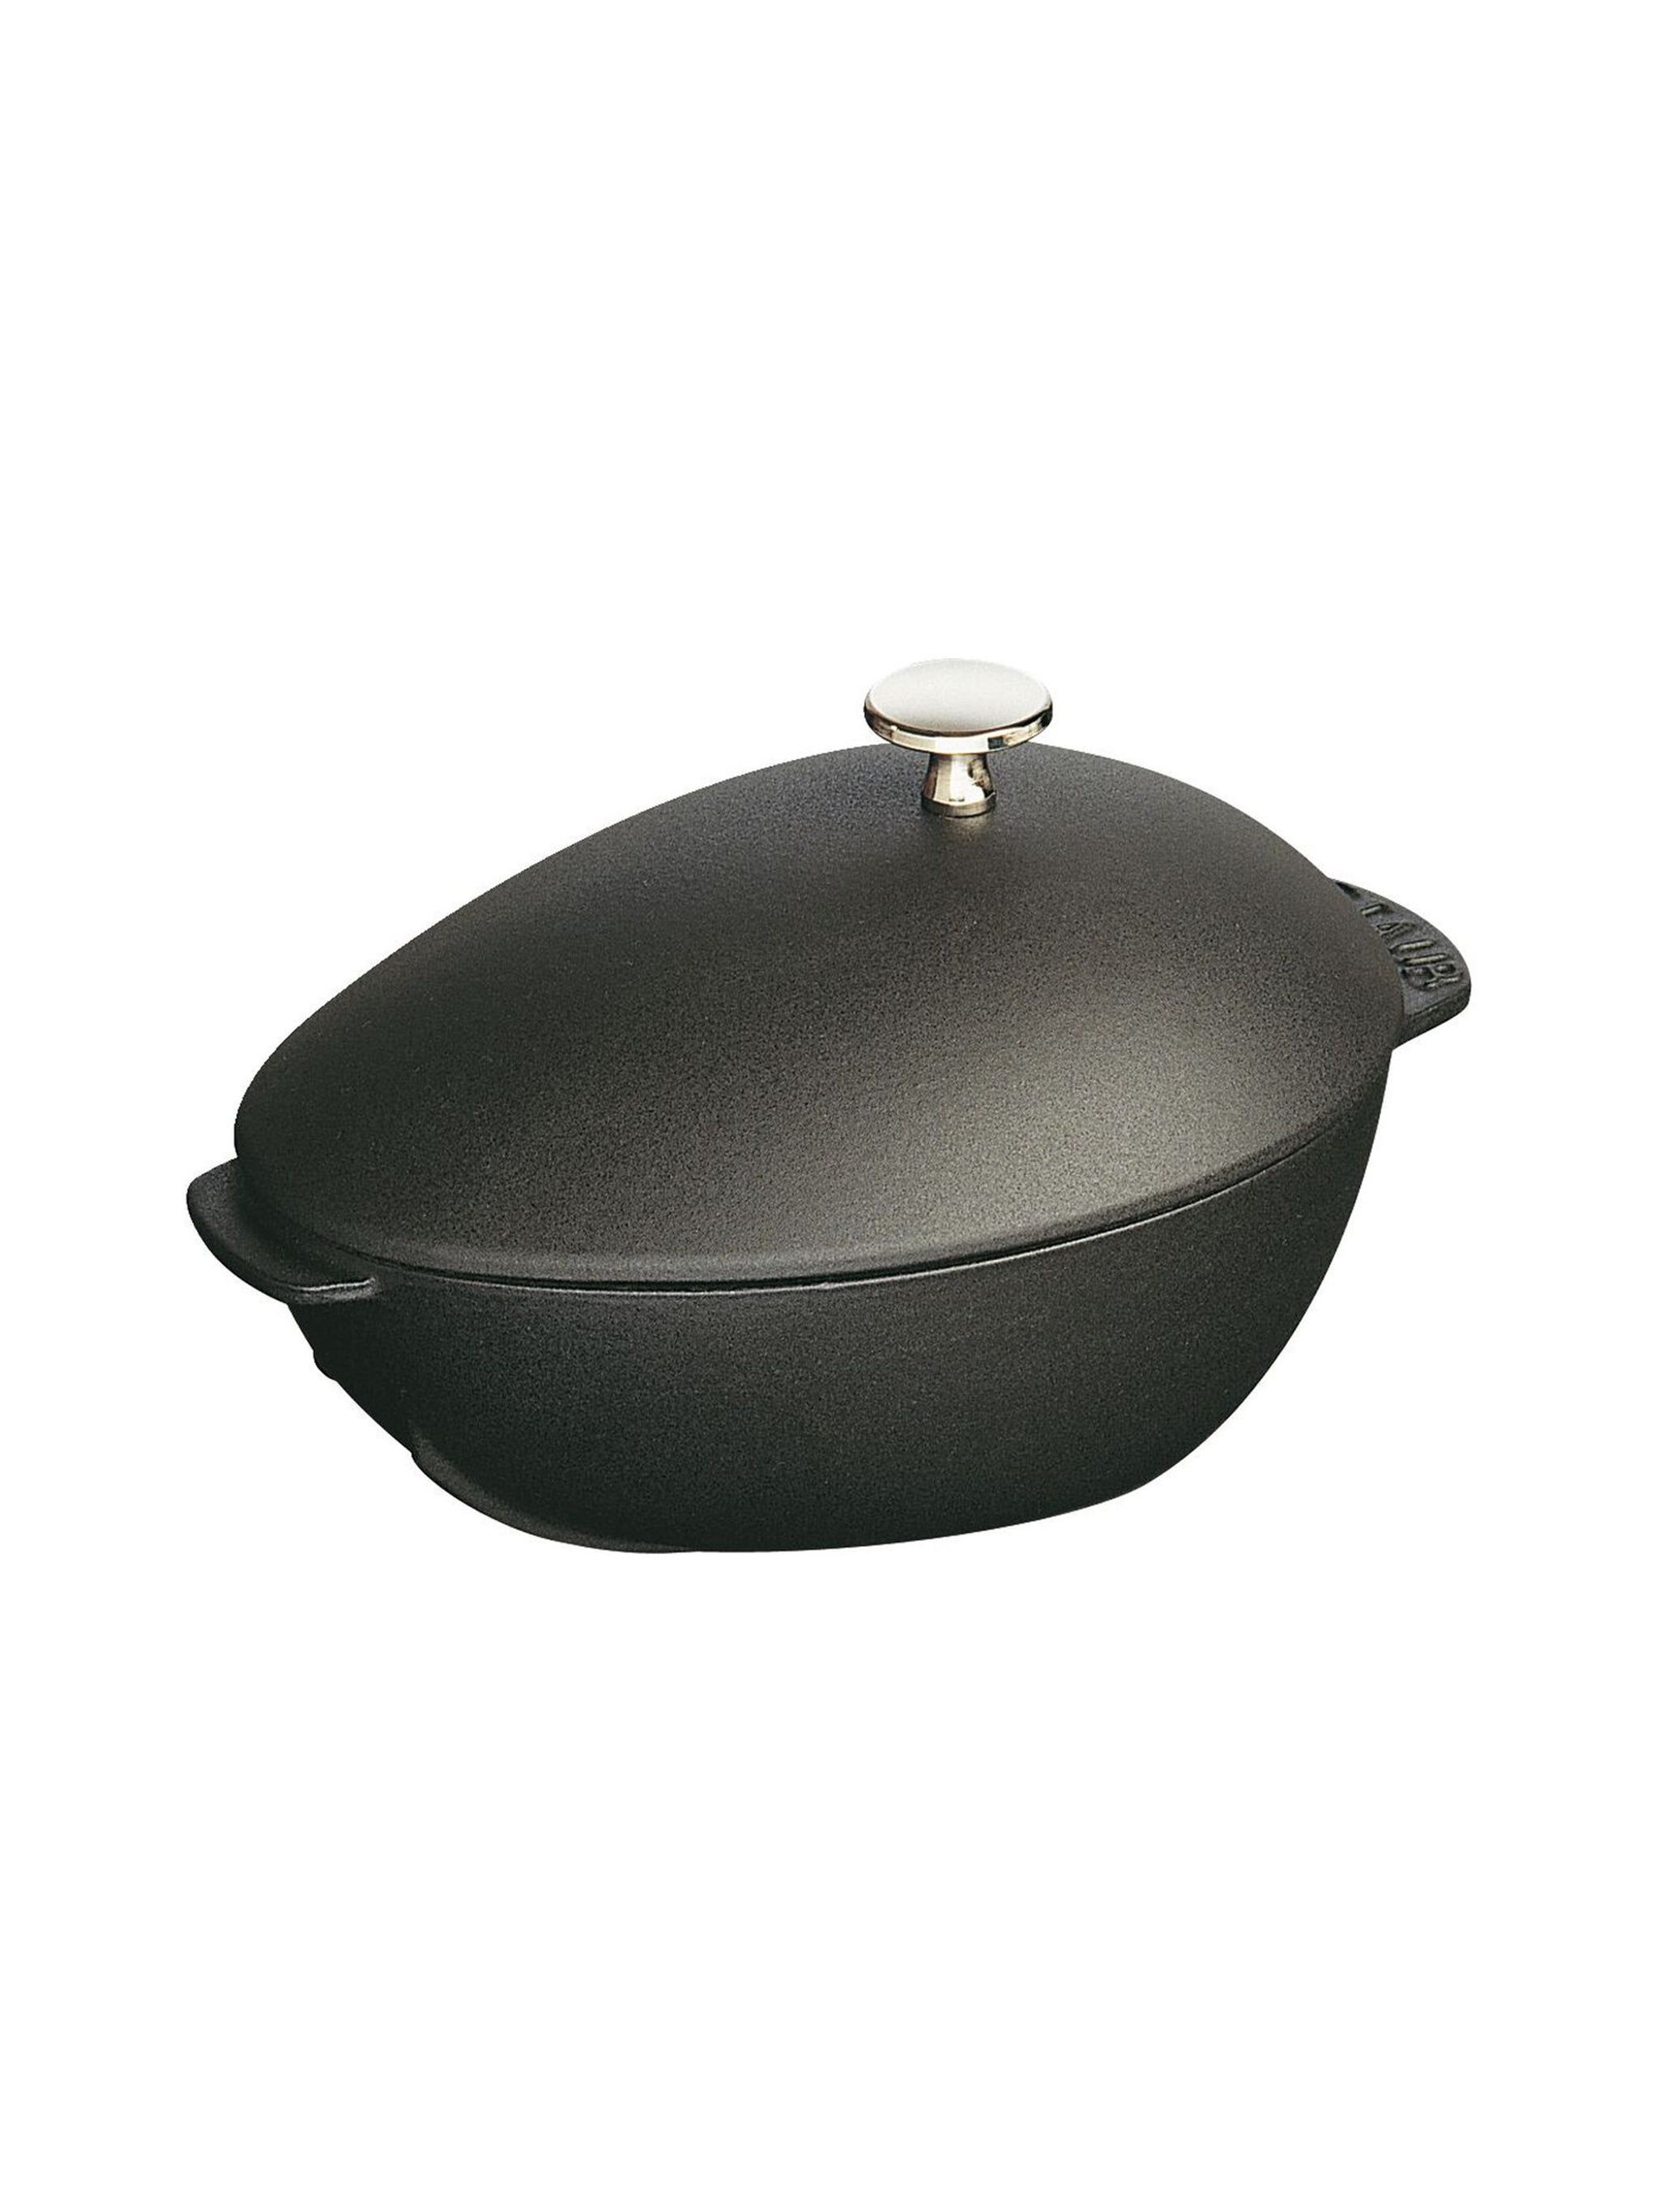 Shop Staub Cast Iron Covered Fish Pan at Weston Table